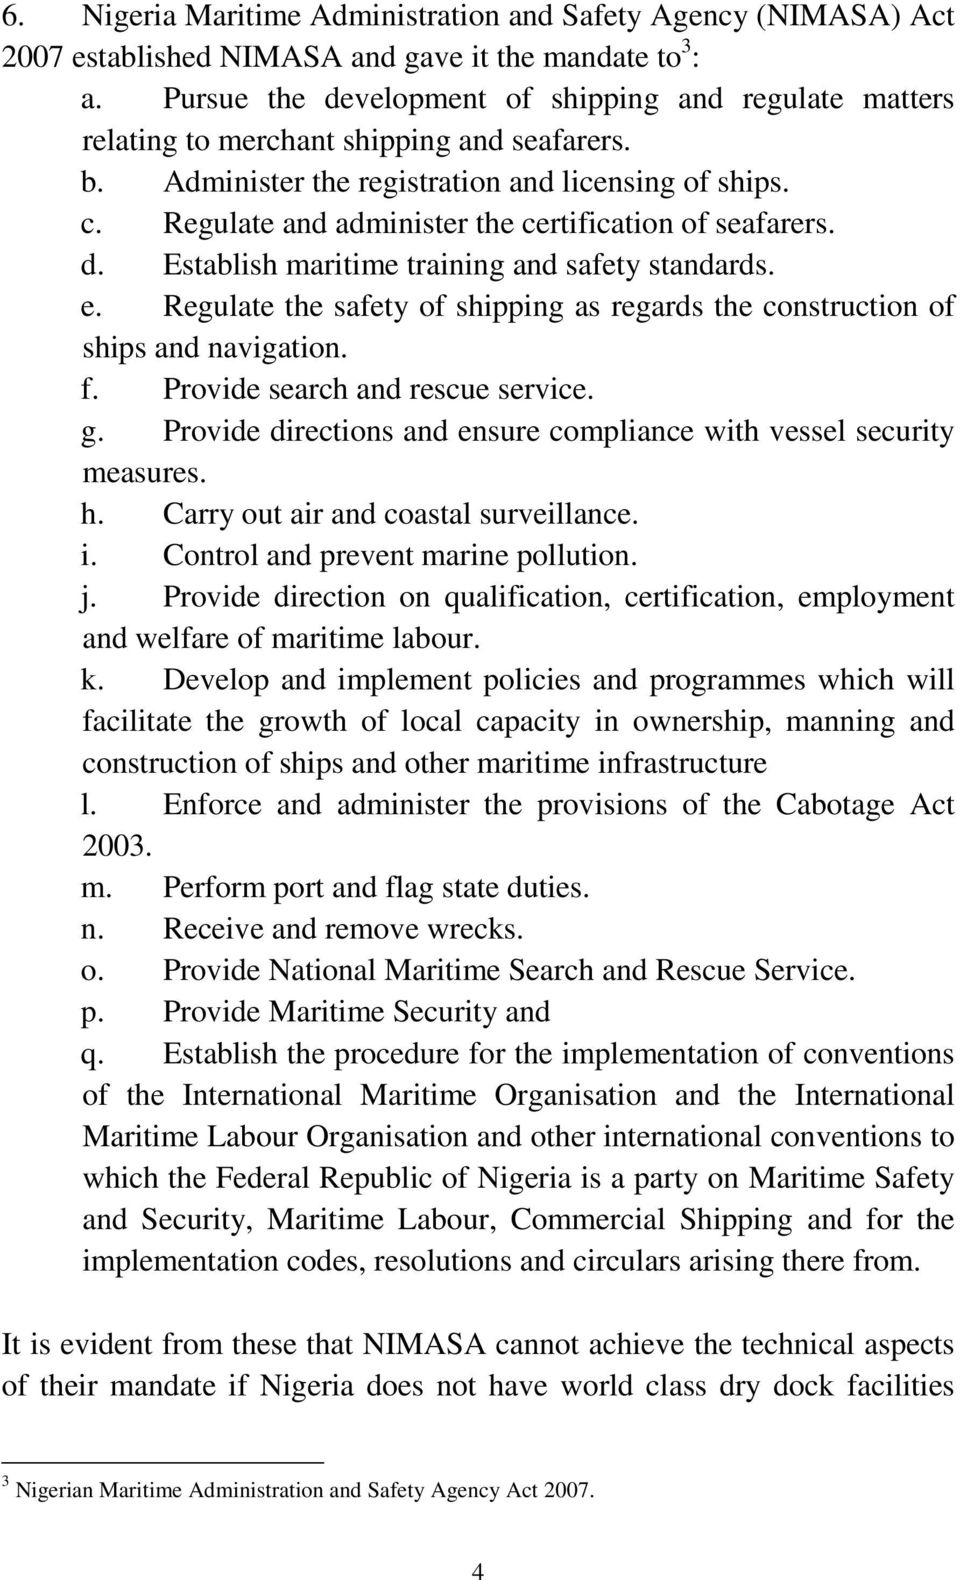 Regulate and administer the certification of seafarers. d. Establish maritime training and safety standards. e. Regulate the safety of shipping as regards the construction of ships and navigation. f.